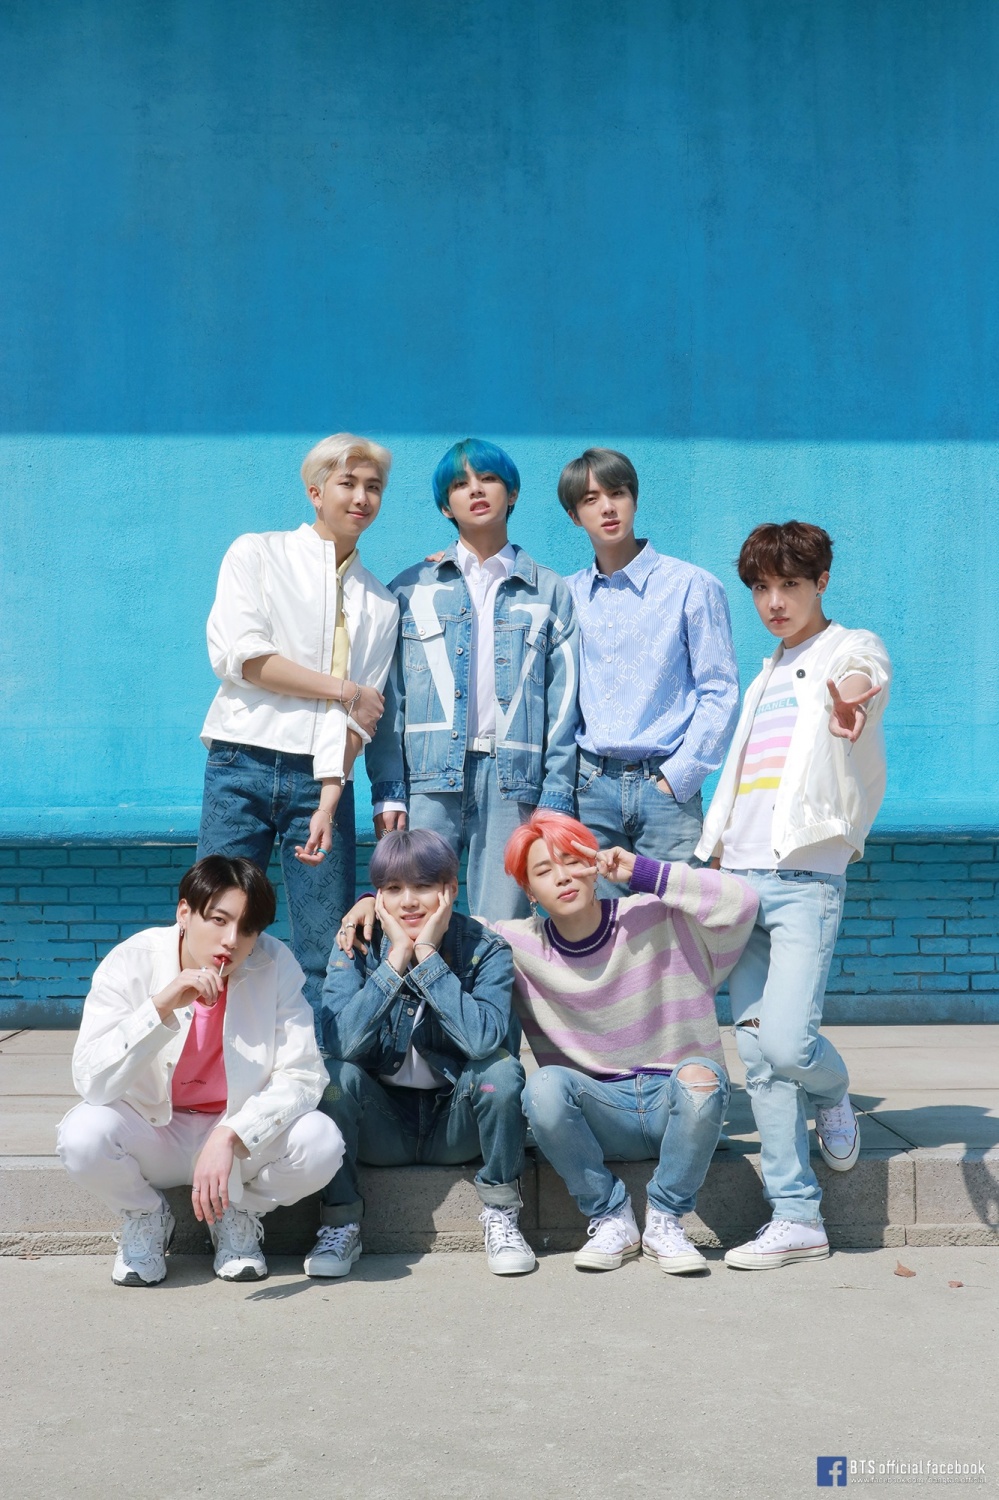 BTS releases limited album 'BE' (Deluxe Edition)